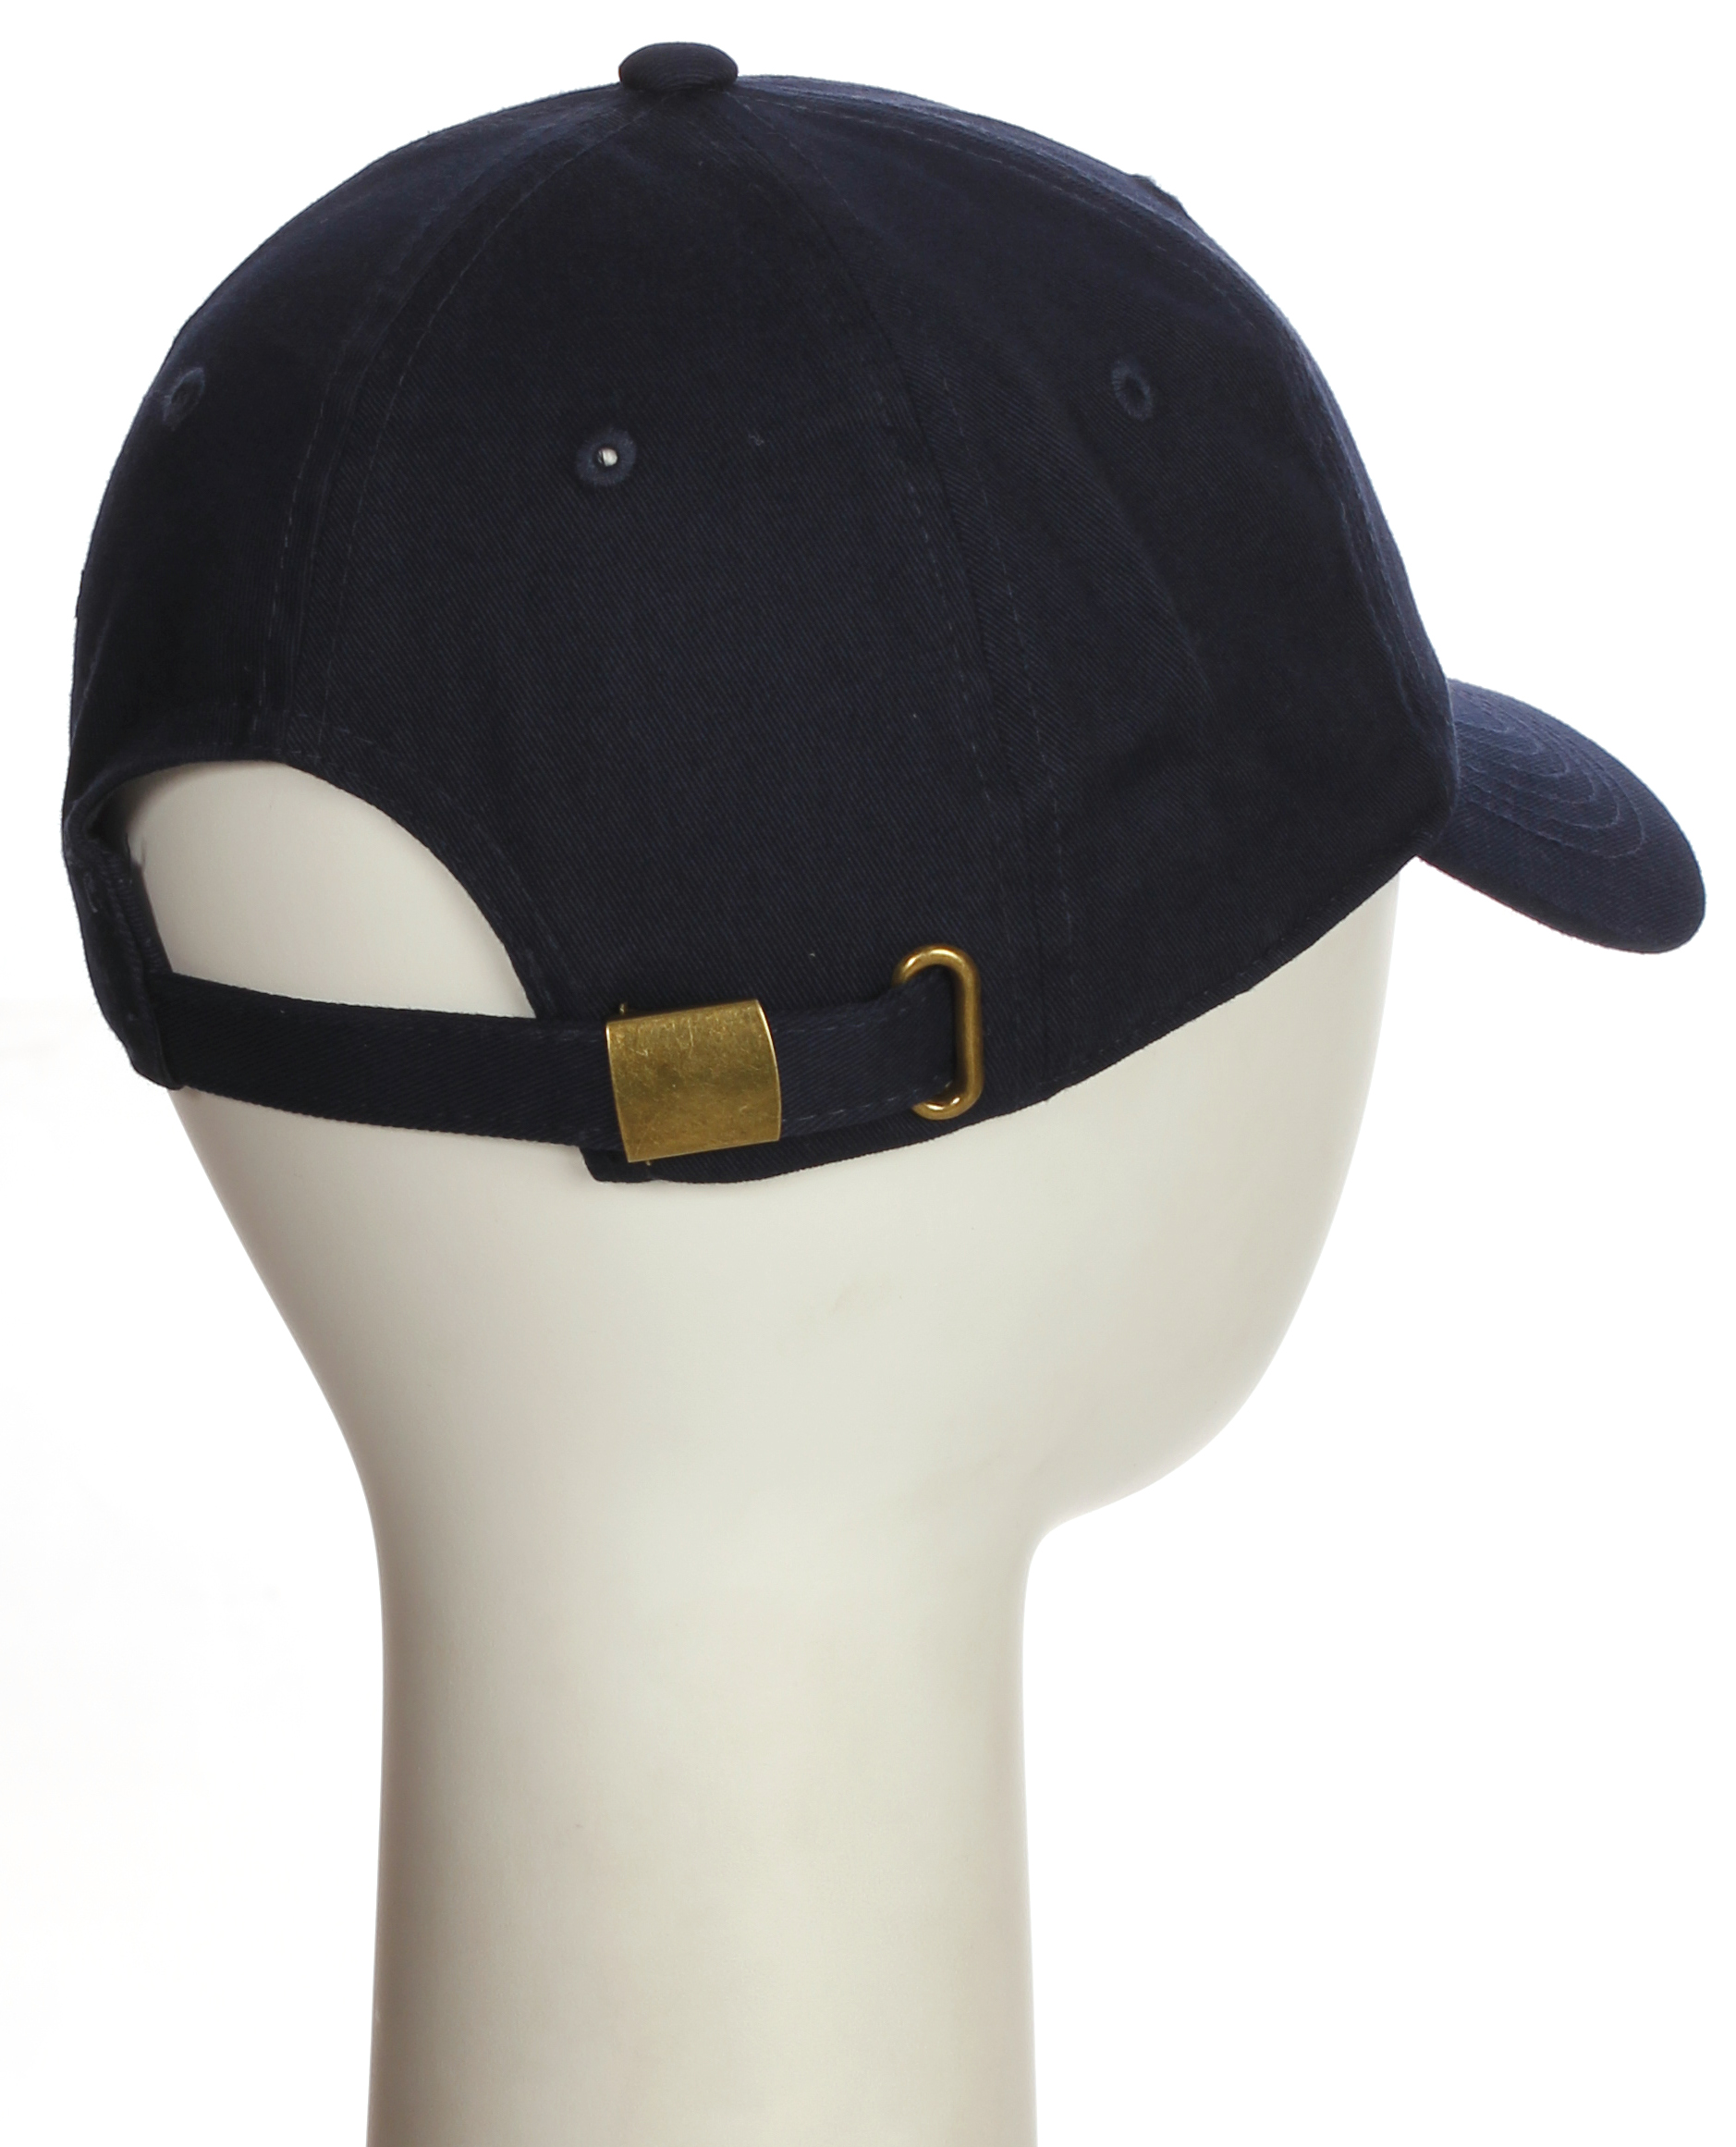 Customized Number Hat 00 to 99 Team Colors Baseball Cap, Navy Hat White Blue Number 52 - image 3 of 4